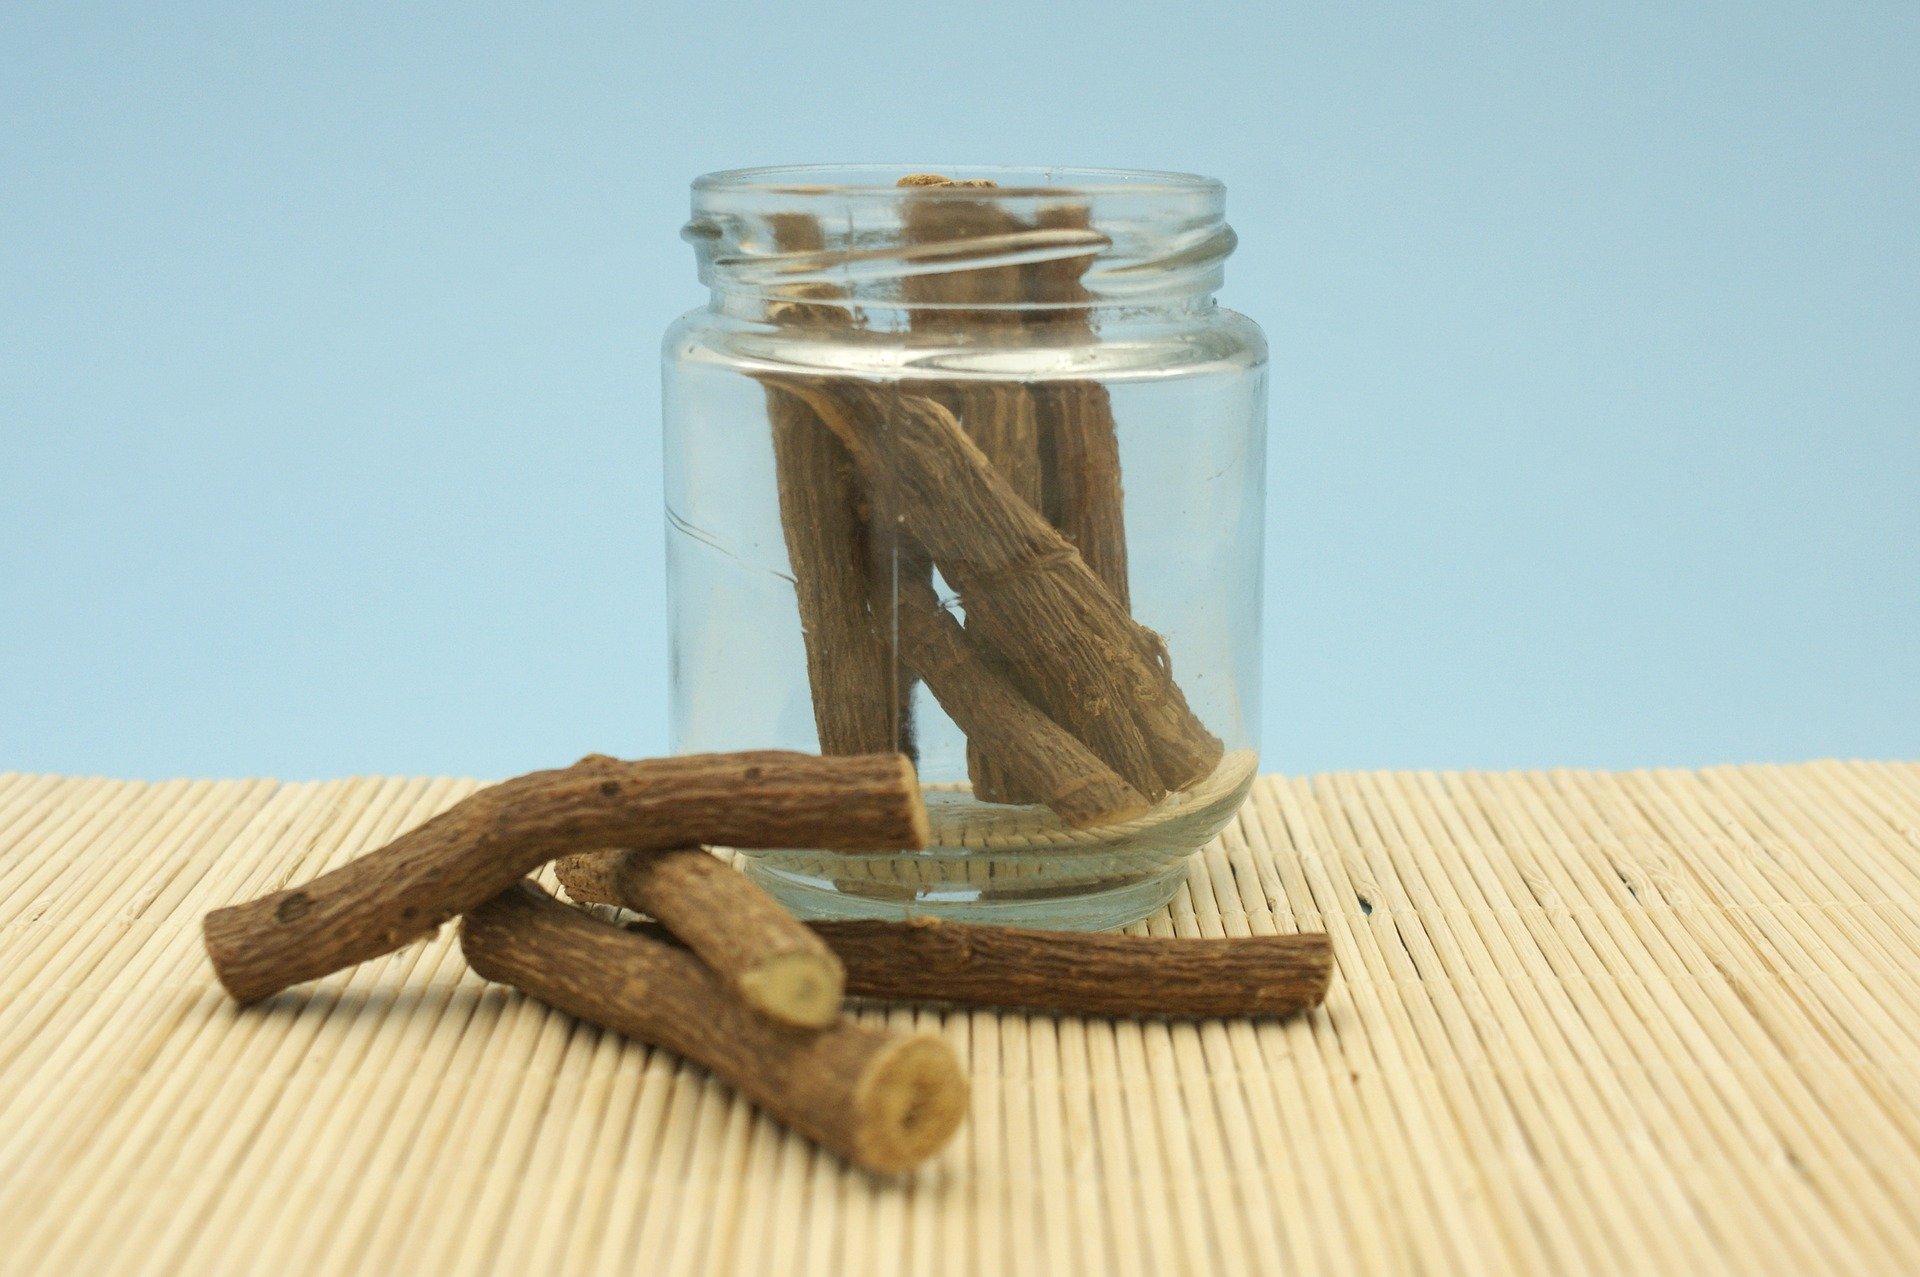 A photo of licorice root, which grows in Calabria, Italy